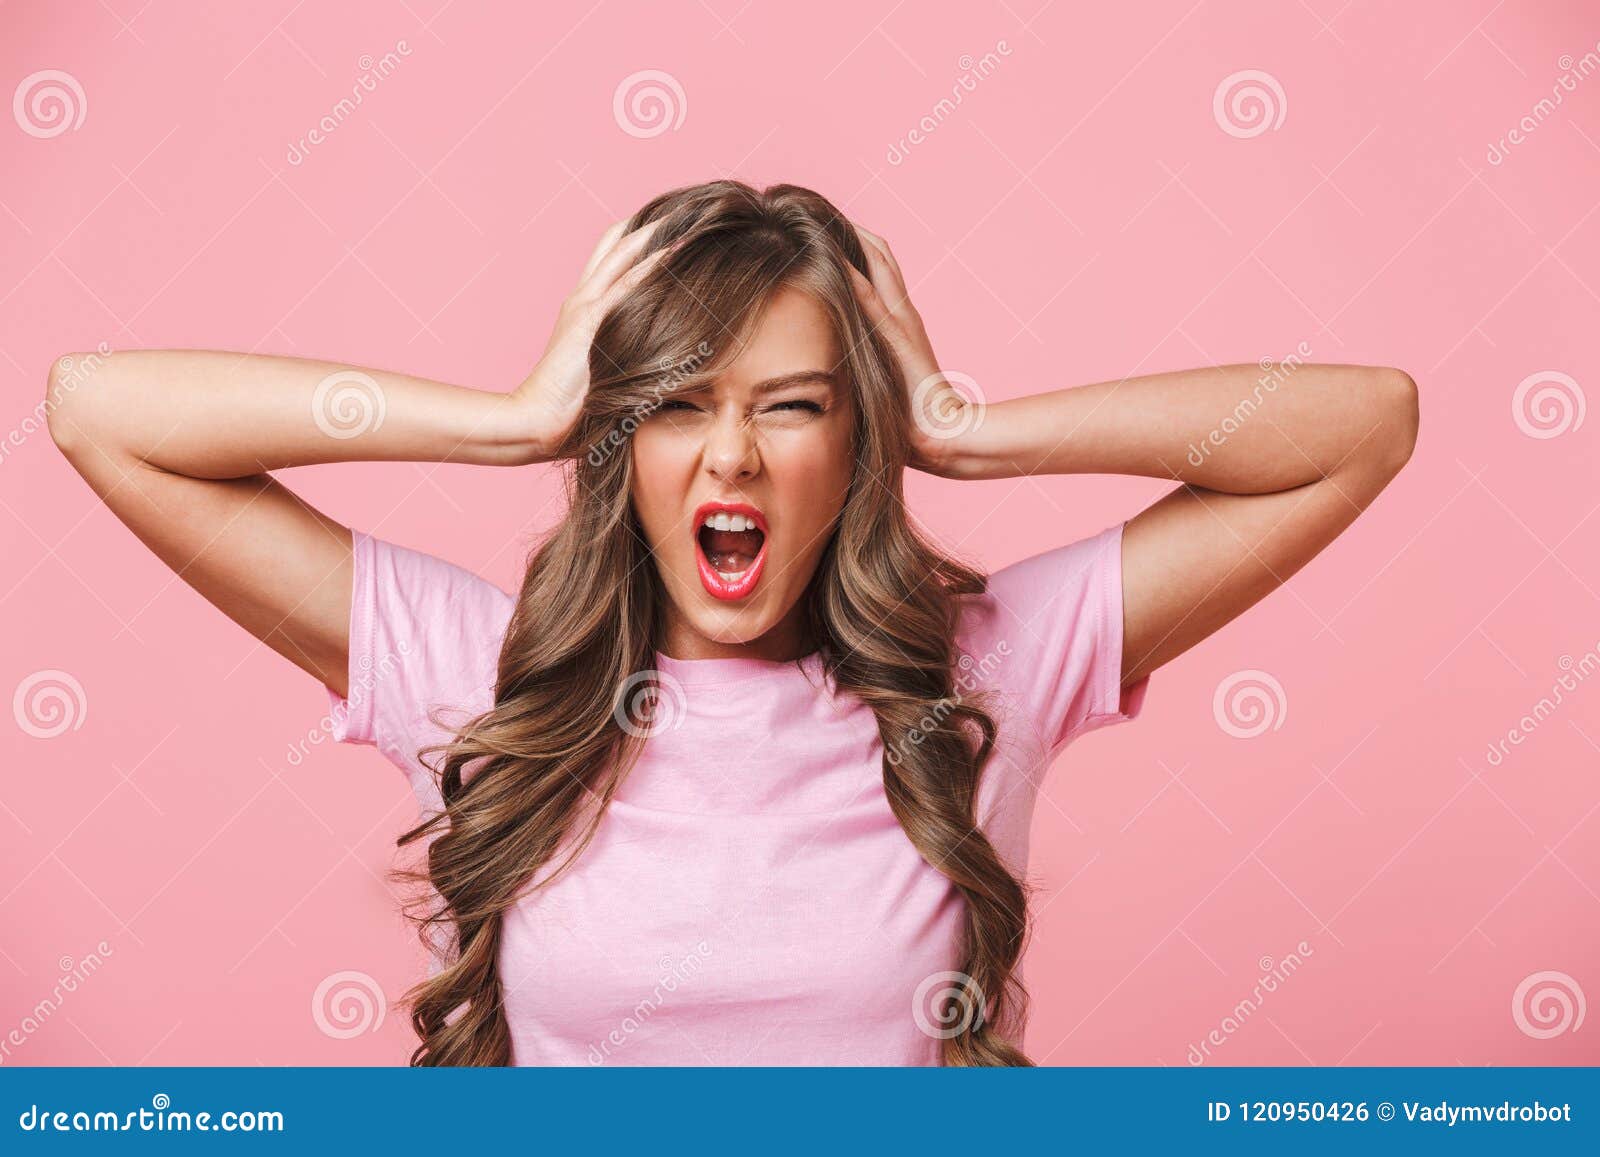 photo closeup of annoyed angry woman with long curly hair in basic t-shirt covering ears and screaming because of terrible